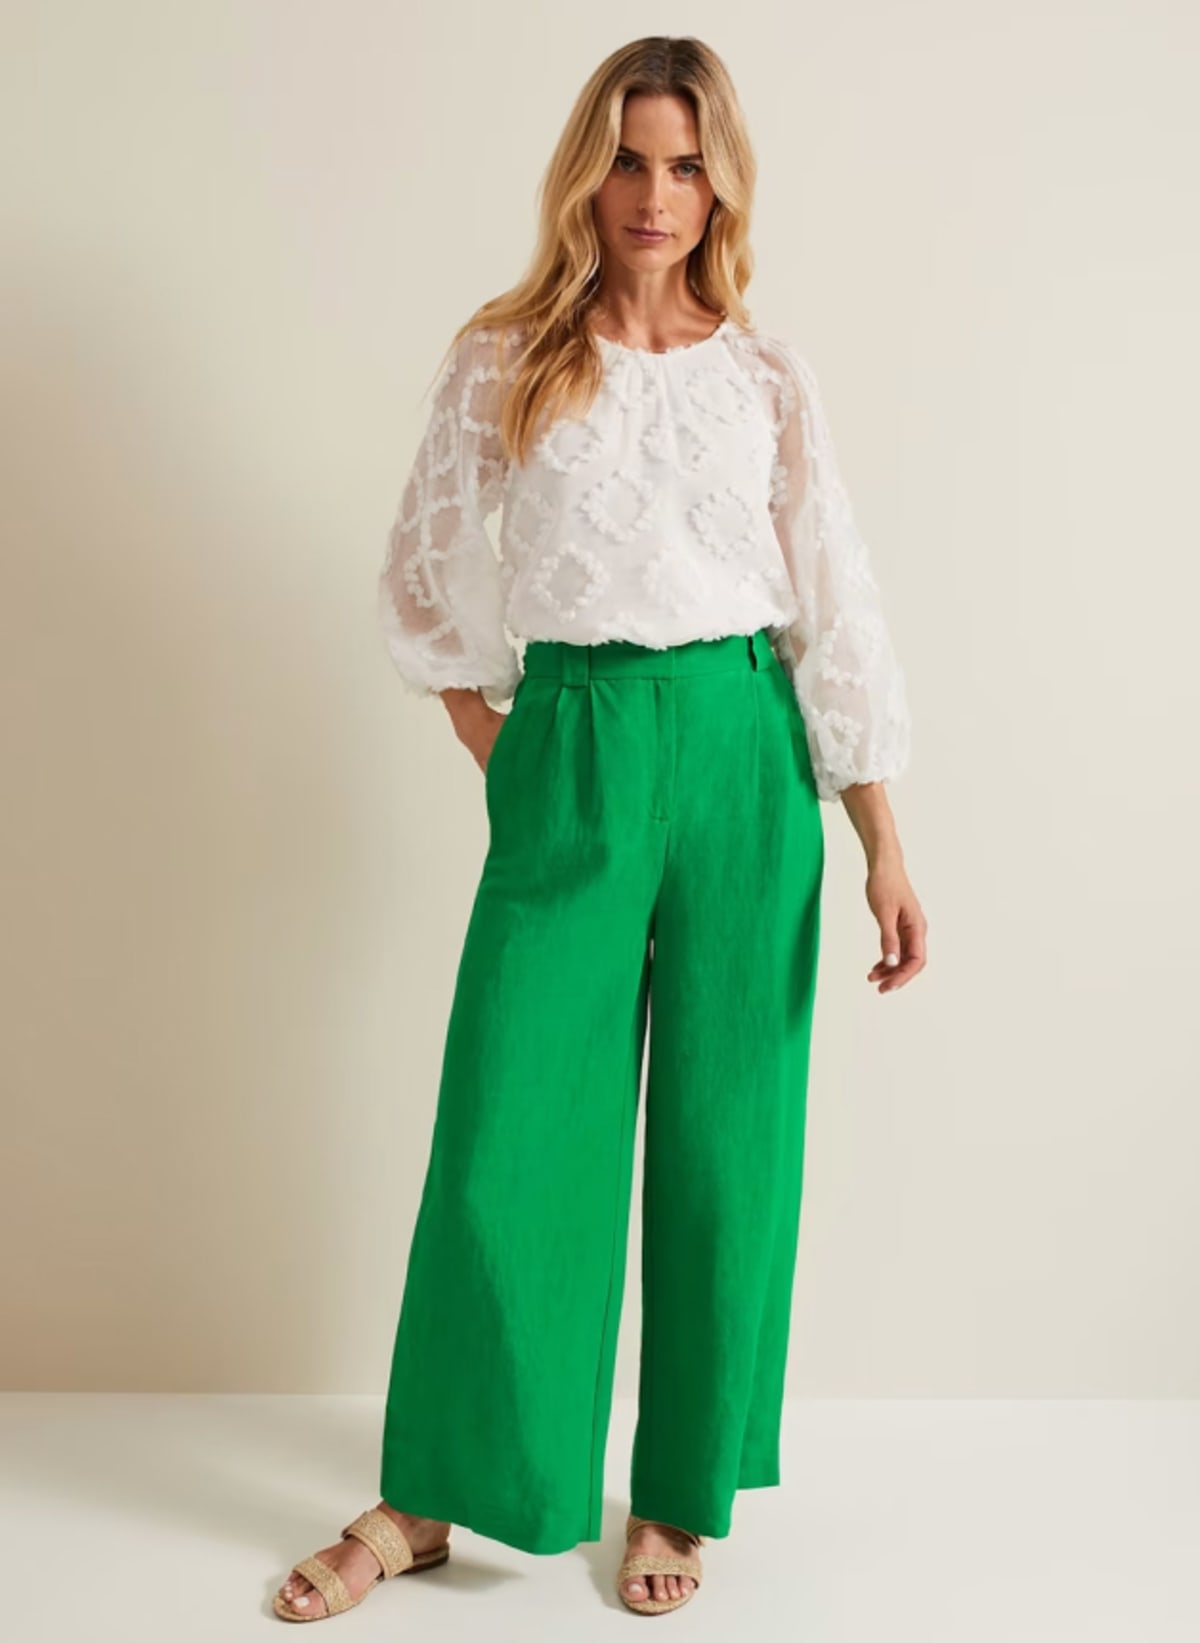 Woman wearing Phase Eight white blouse and green trousers